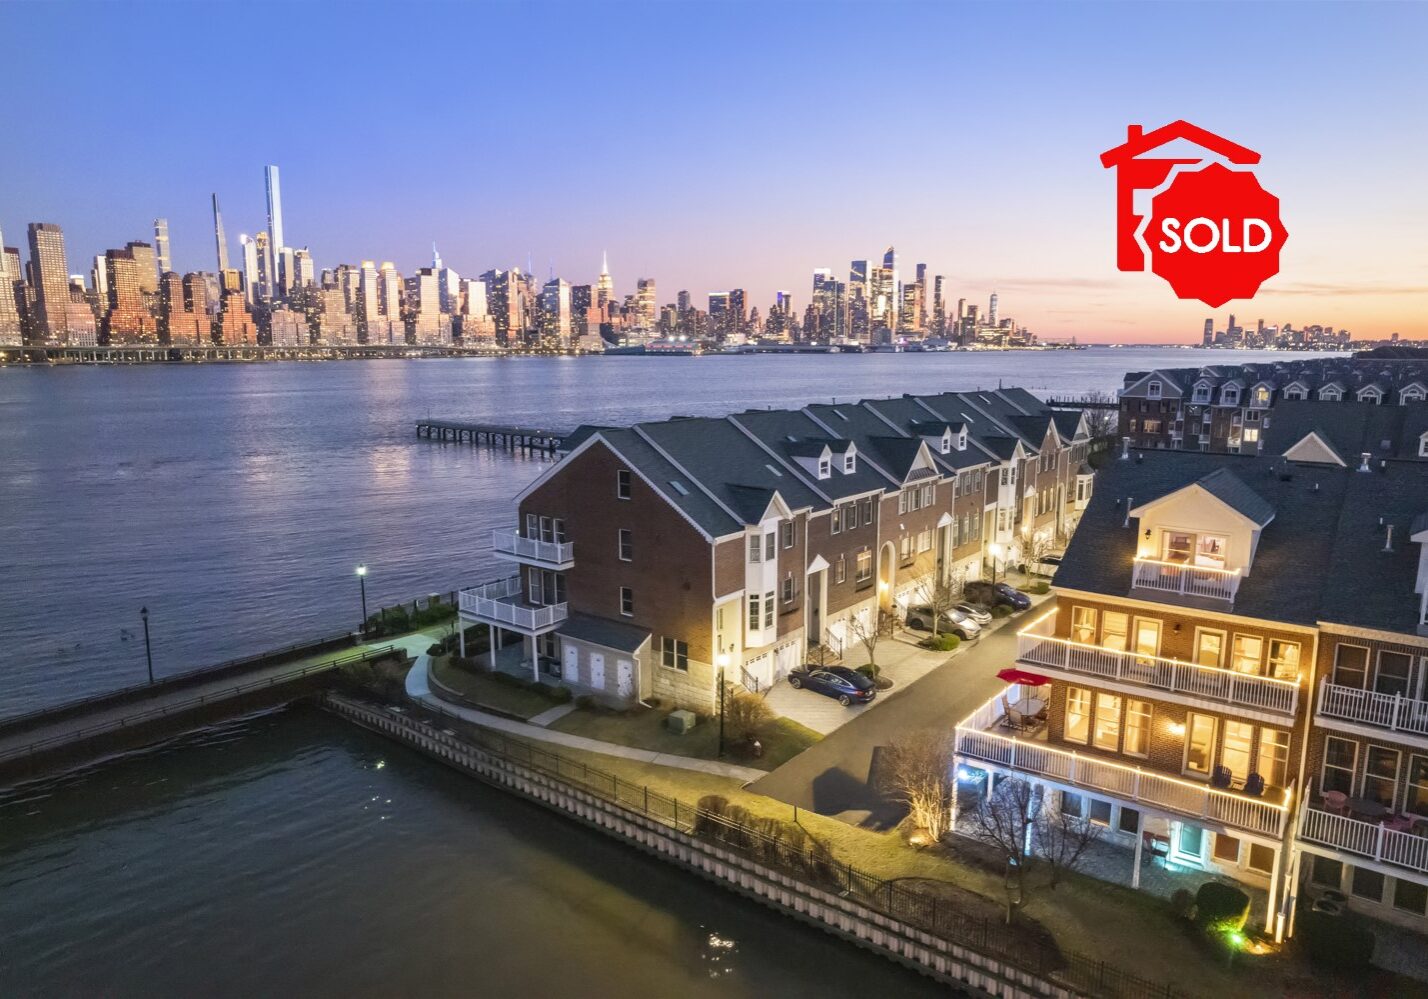 Highest Price for a residence sold in West New York in 3 years!
<br><br>SOLD - 520 Harbor Place West New York, NJ 07093
<br><br>
$2,399,000 - Beds: 4 - Bath: 4 - Half Bath: 1